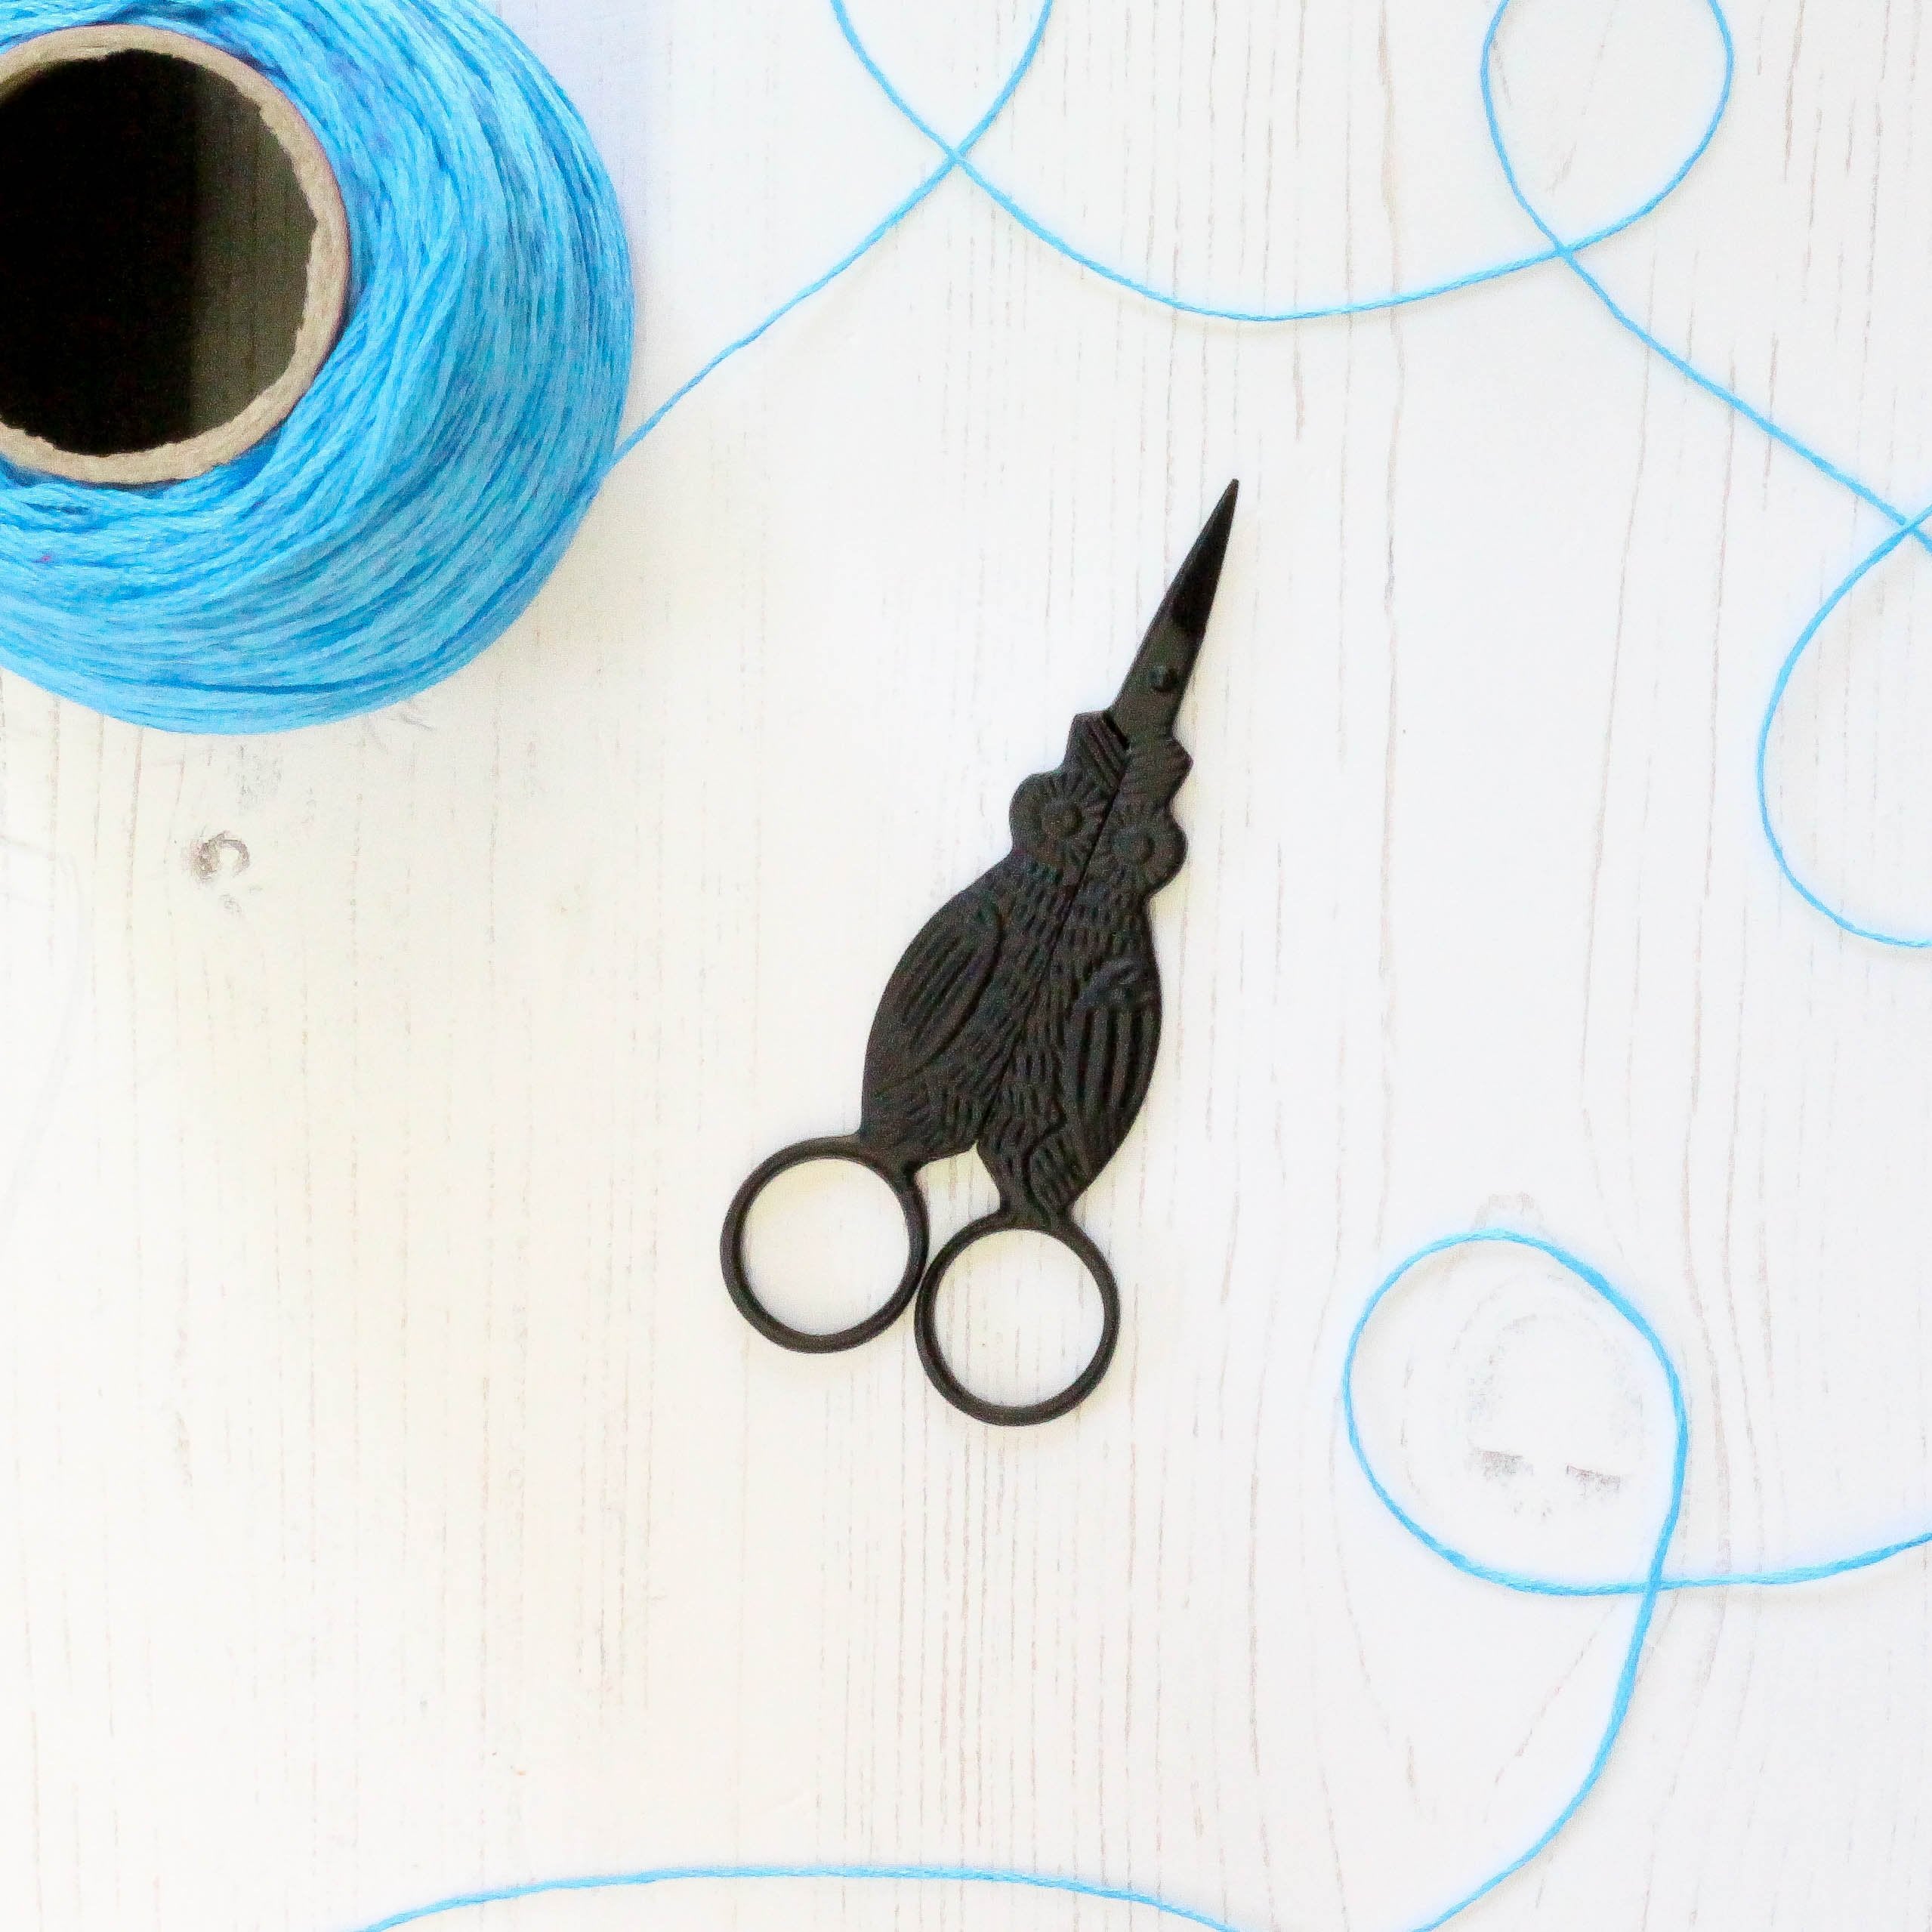 Black Owl Embroidery Scissors closed with thread